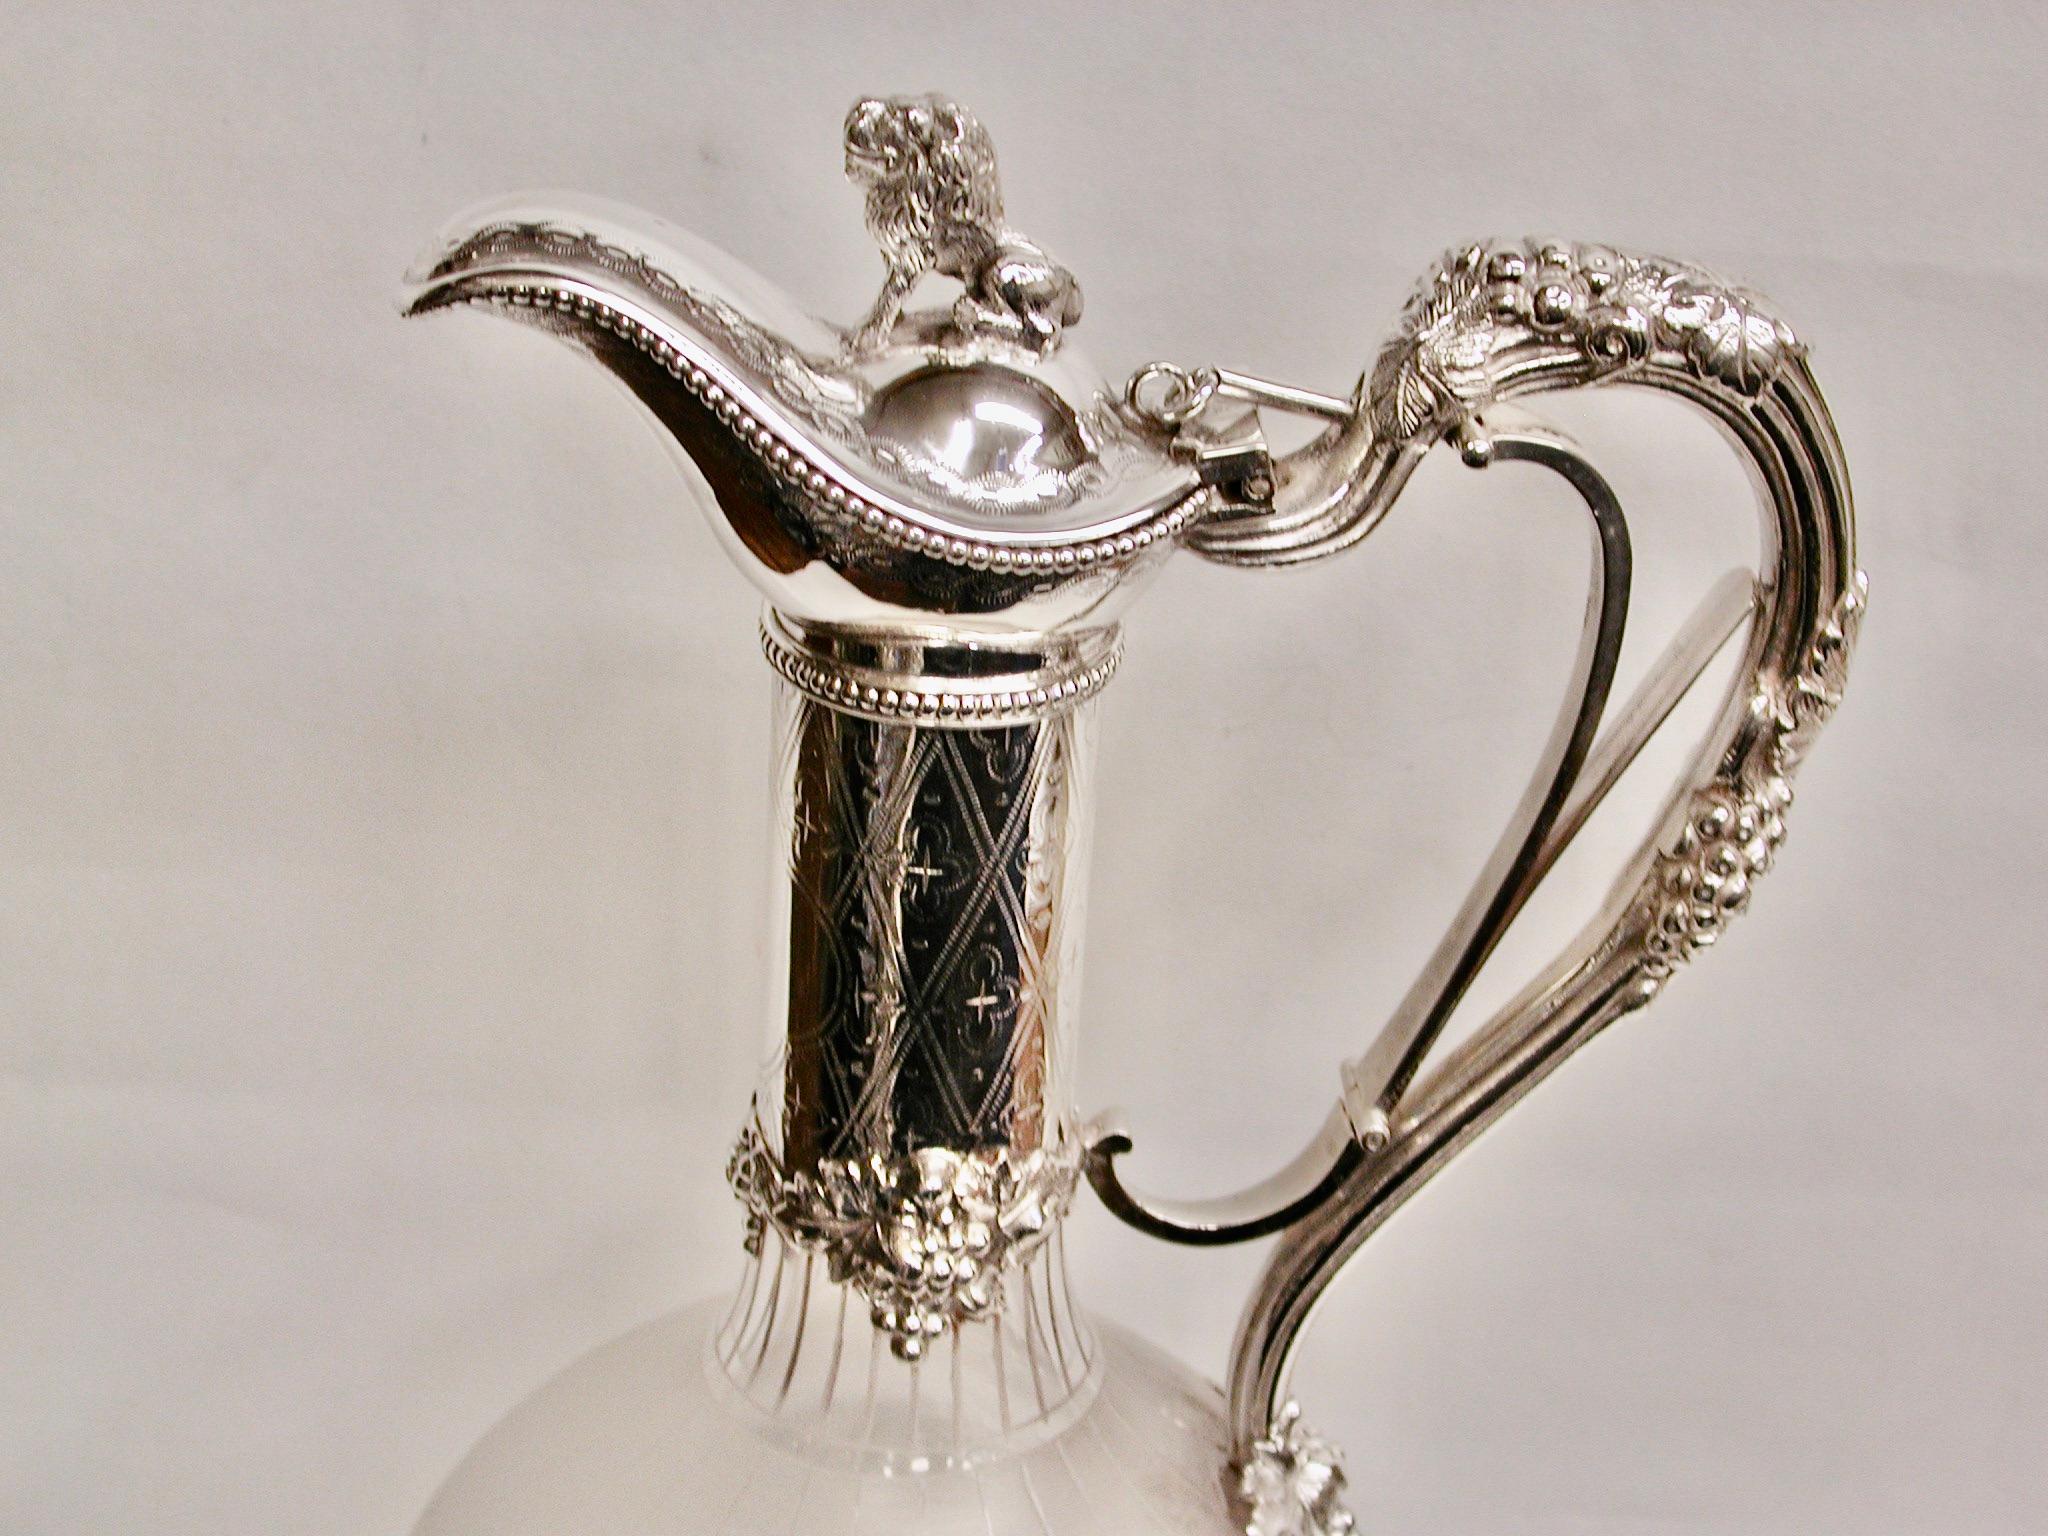 Antique Victorian silver plated and etched glass claret jug, dated circa 1880
Lovely shaped claret jug with a trigger handle, beautifully etched glass decorated with
flowers and leaves and bow festooning.
The silver plated top has grape and vine